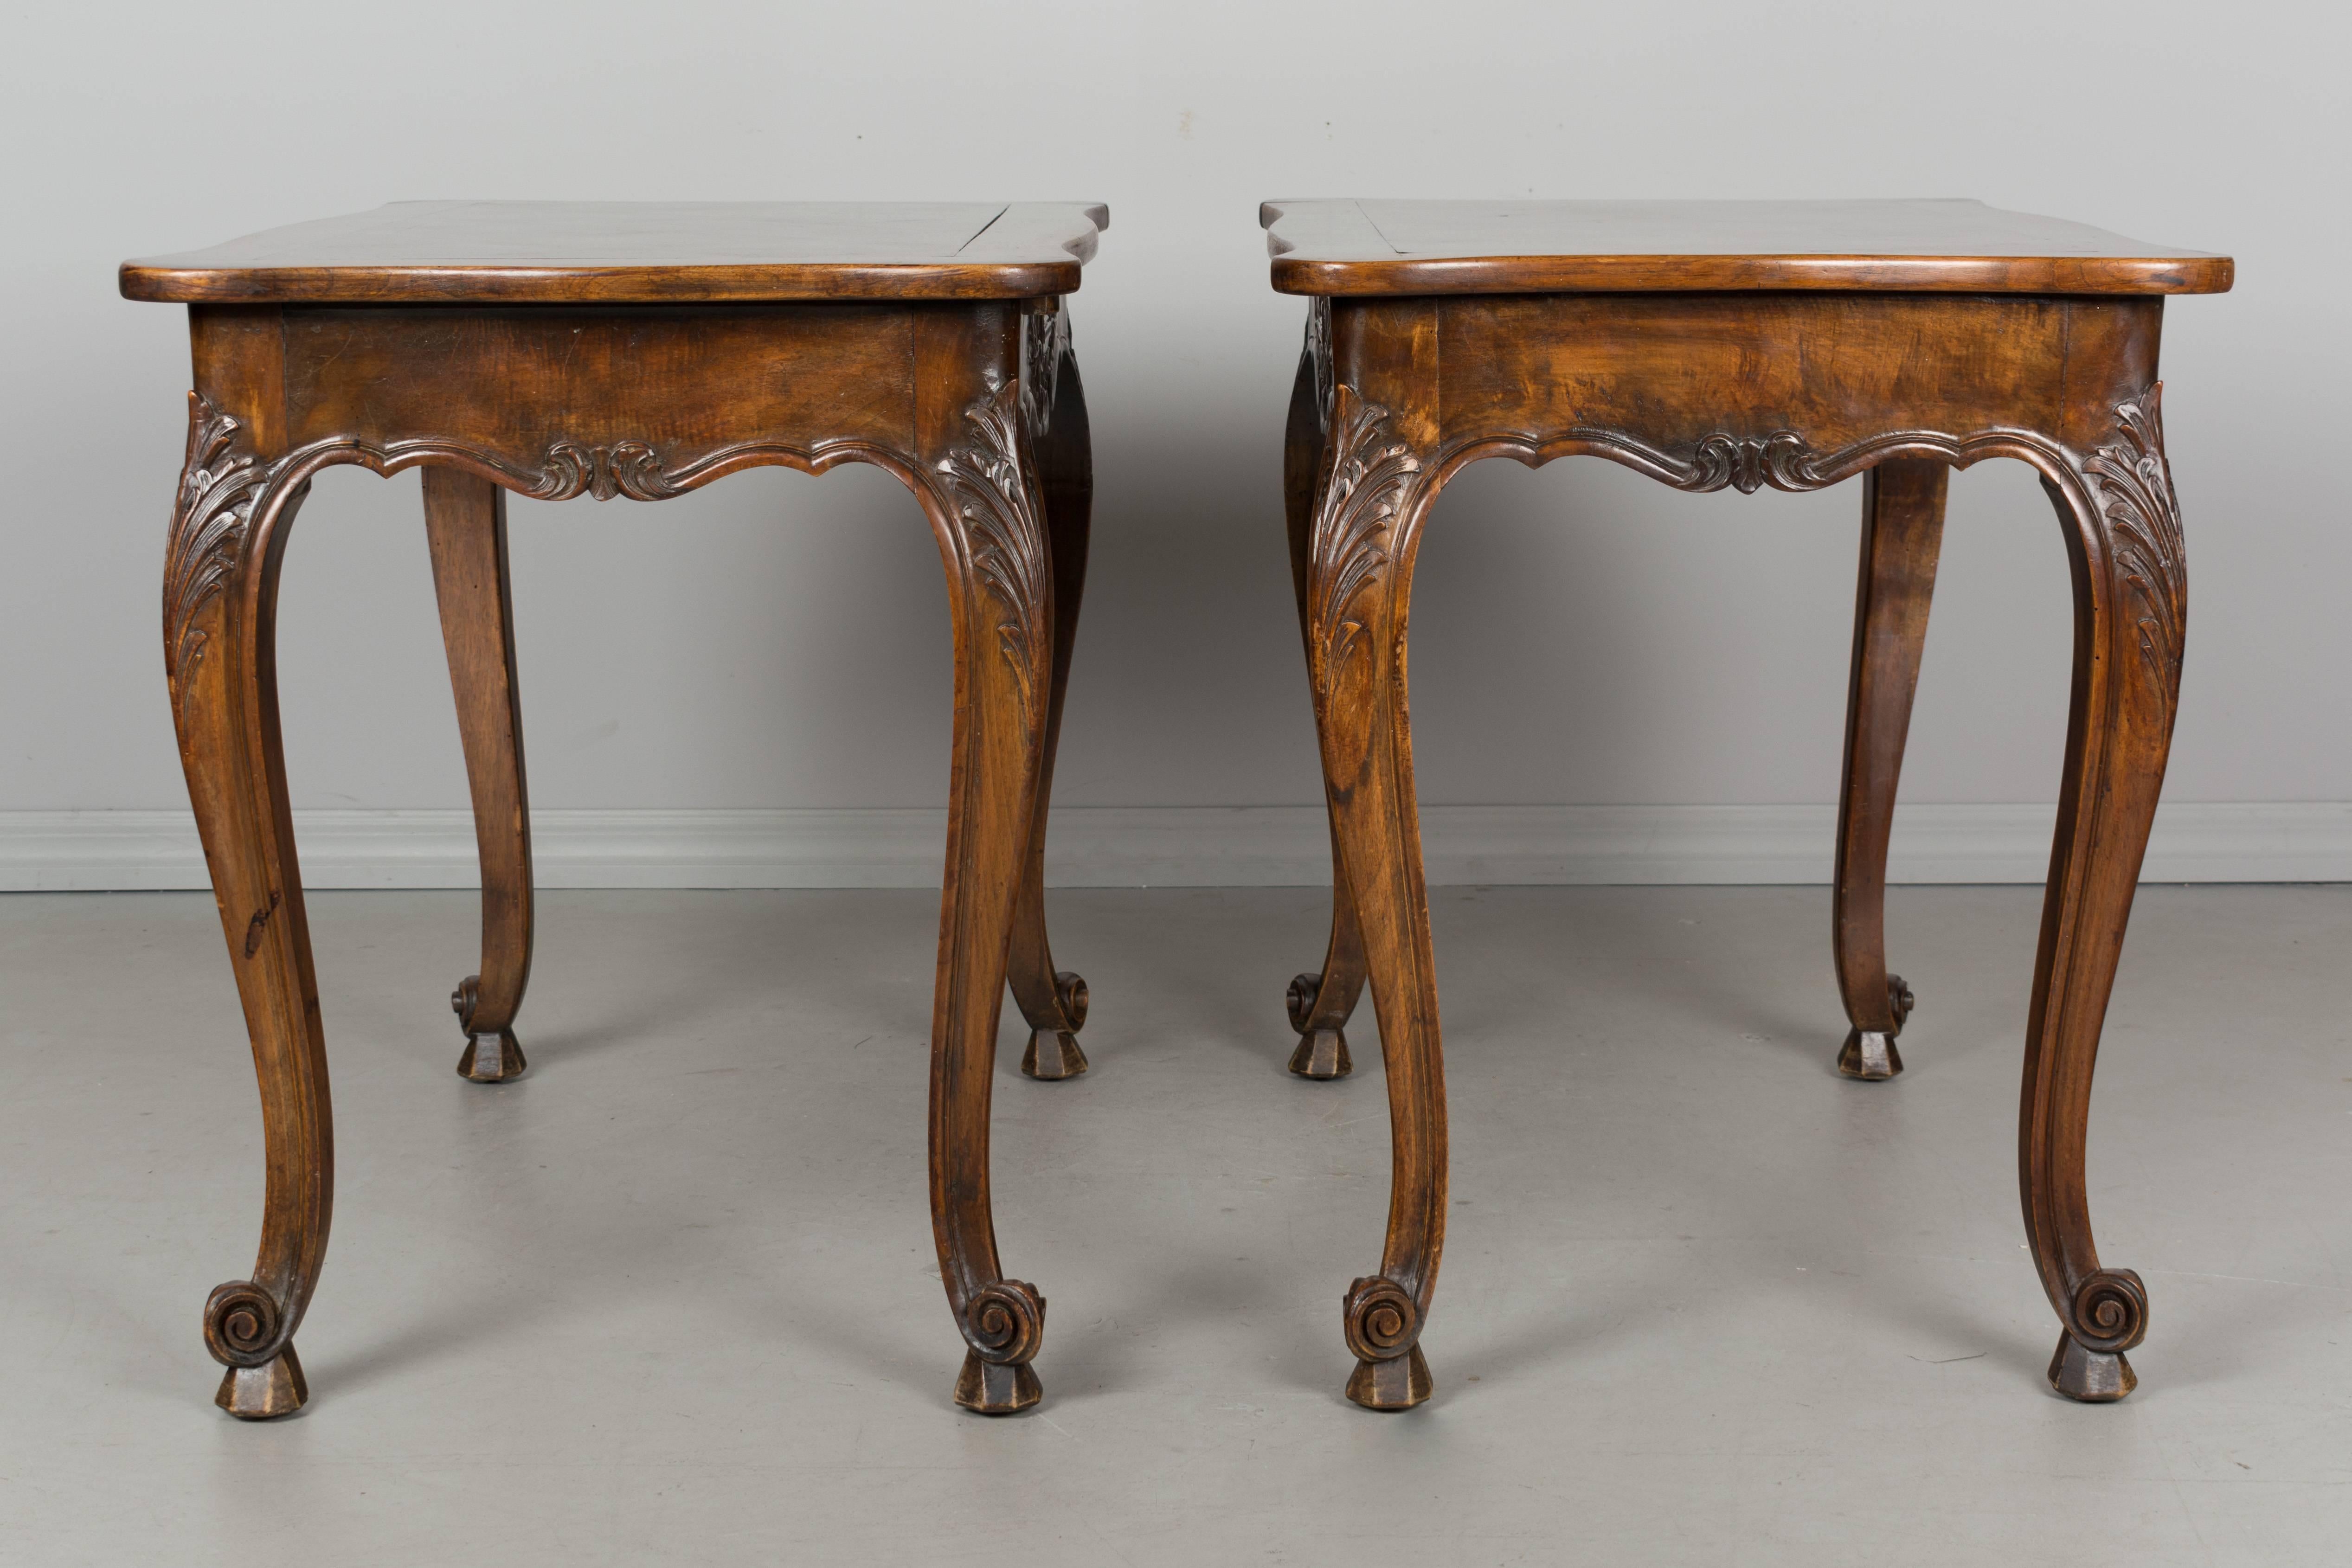 Hand-Carved Pair of 19th Century French Parquet Top Tables